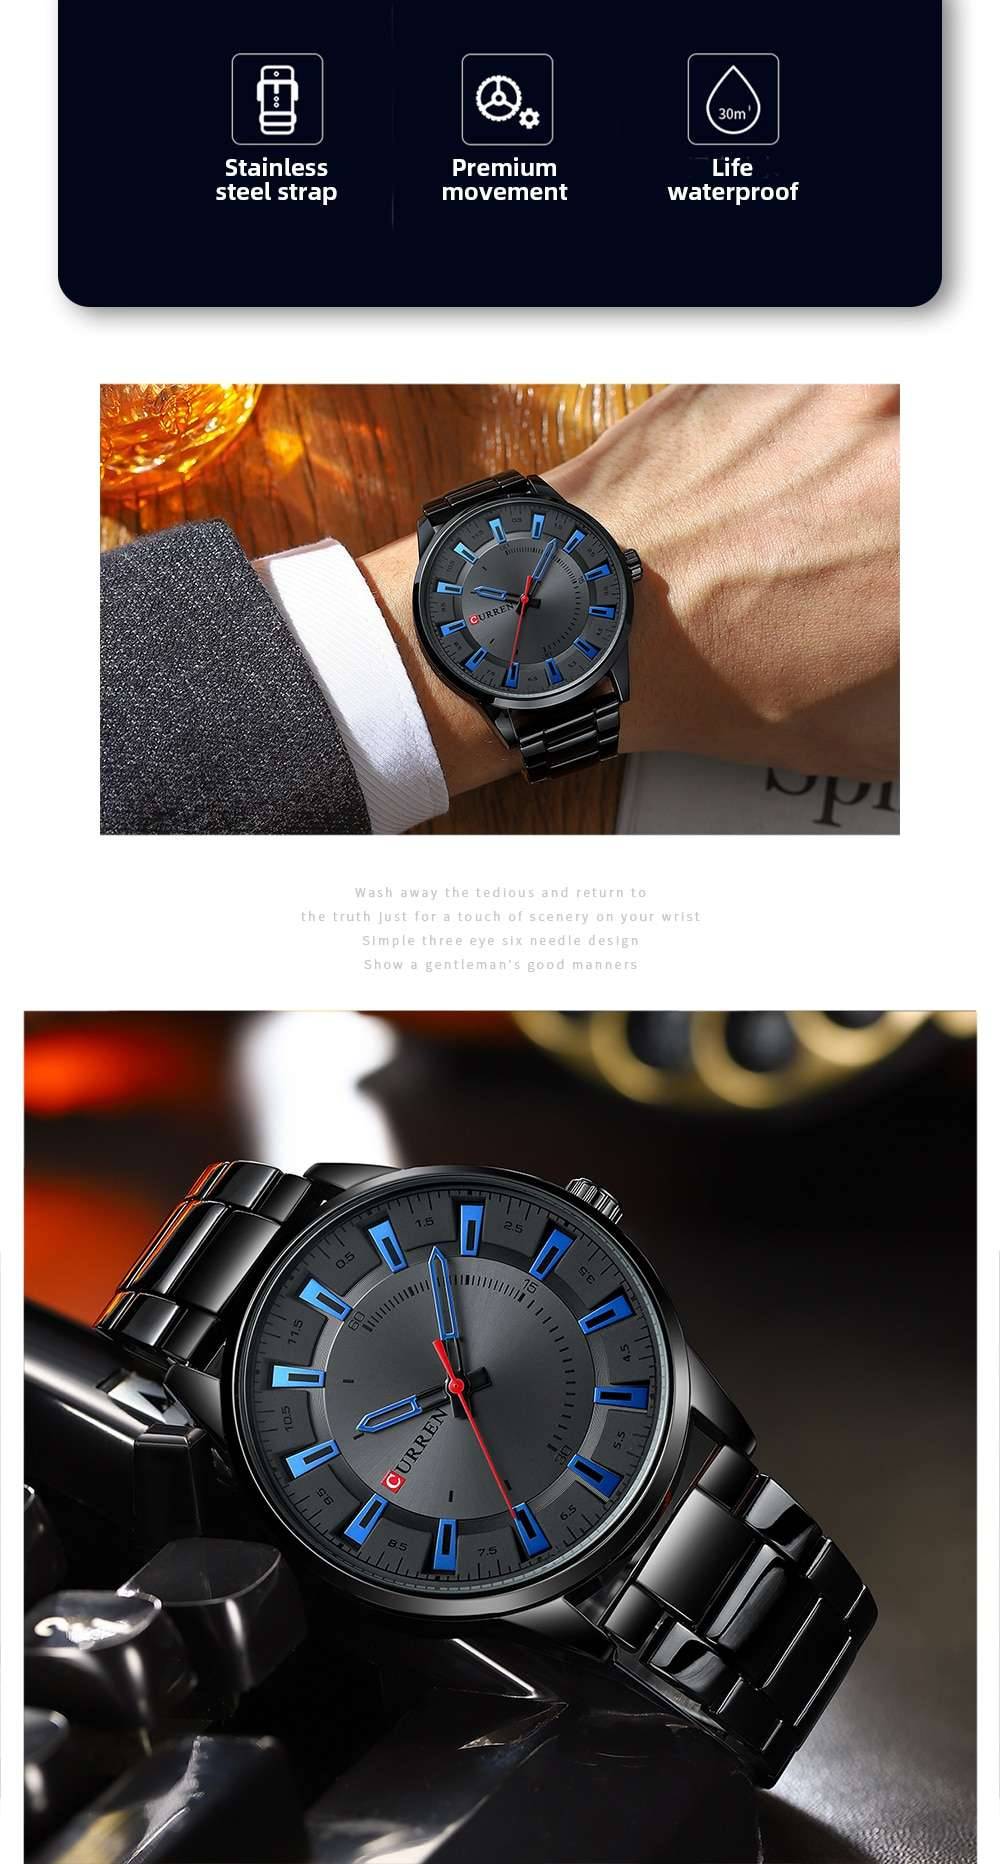 CURREN New Fashion Simple Style Men Watches Quartz Wristwatches Stainless Steel Band Clock Male